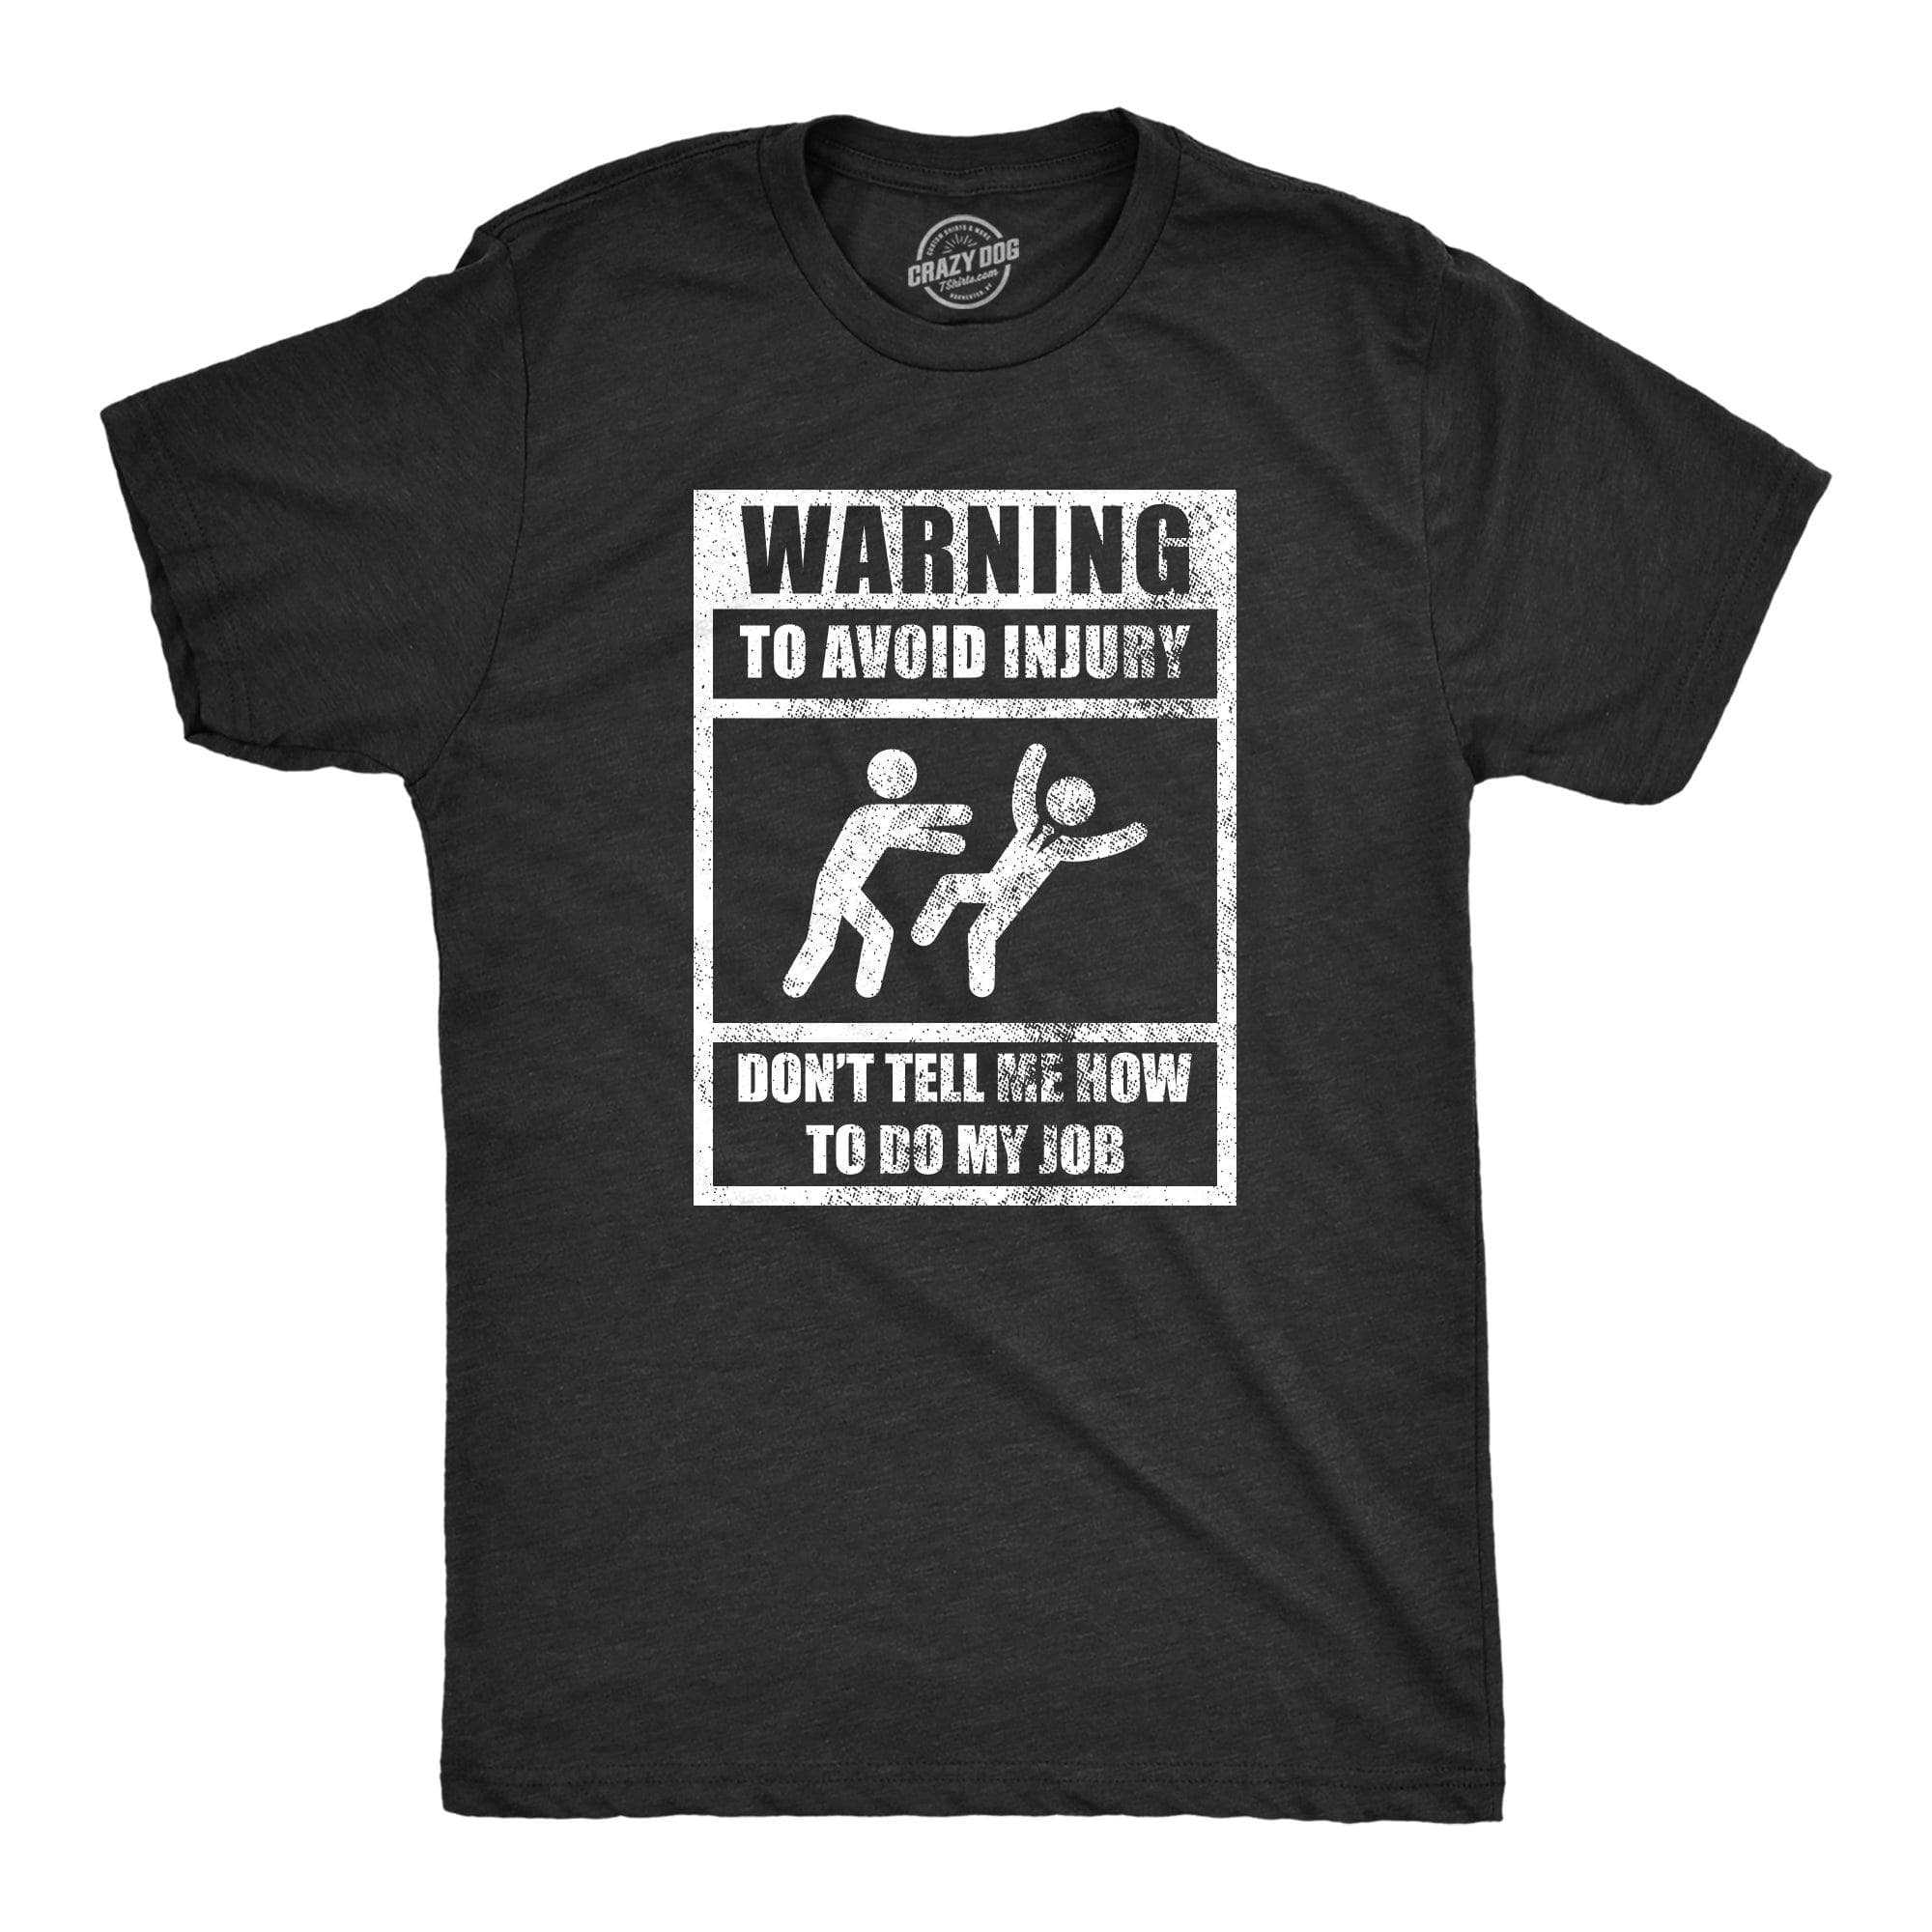 Warning To Avoid Injury Don’t Tell Me How To Do My Job Men's Tshirt  -  Crazy Dog T-Shirts